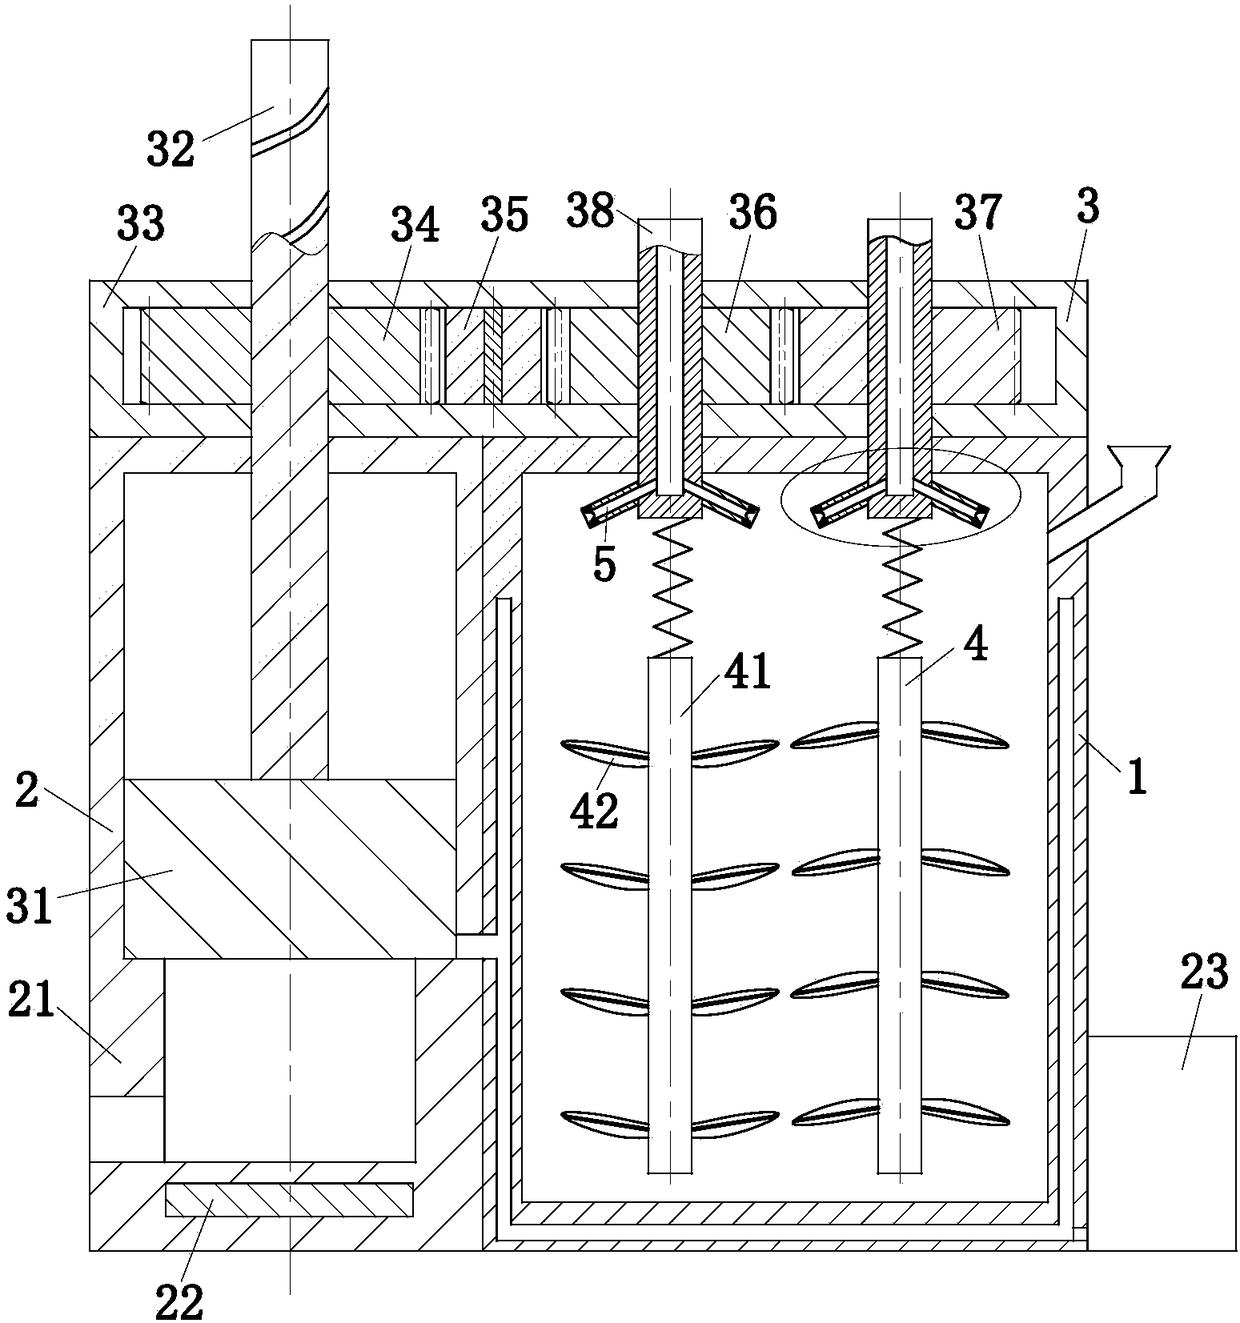 Liquid-state cosmetic mixed process treatment system